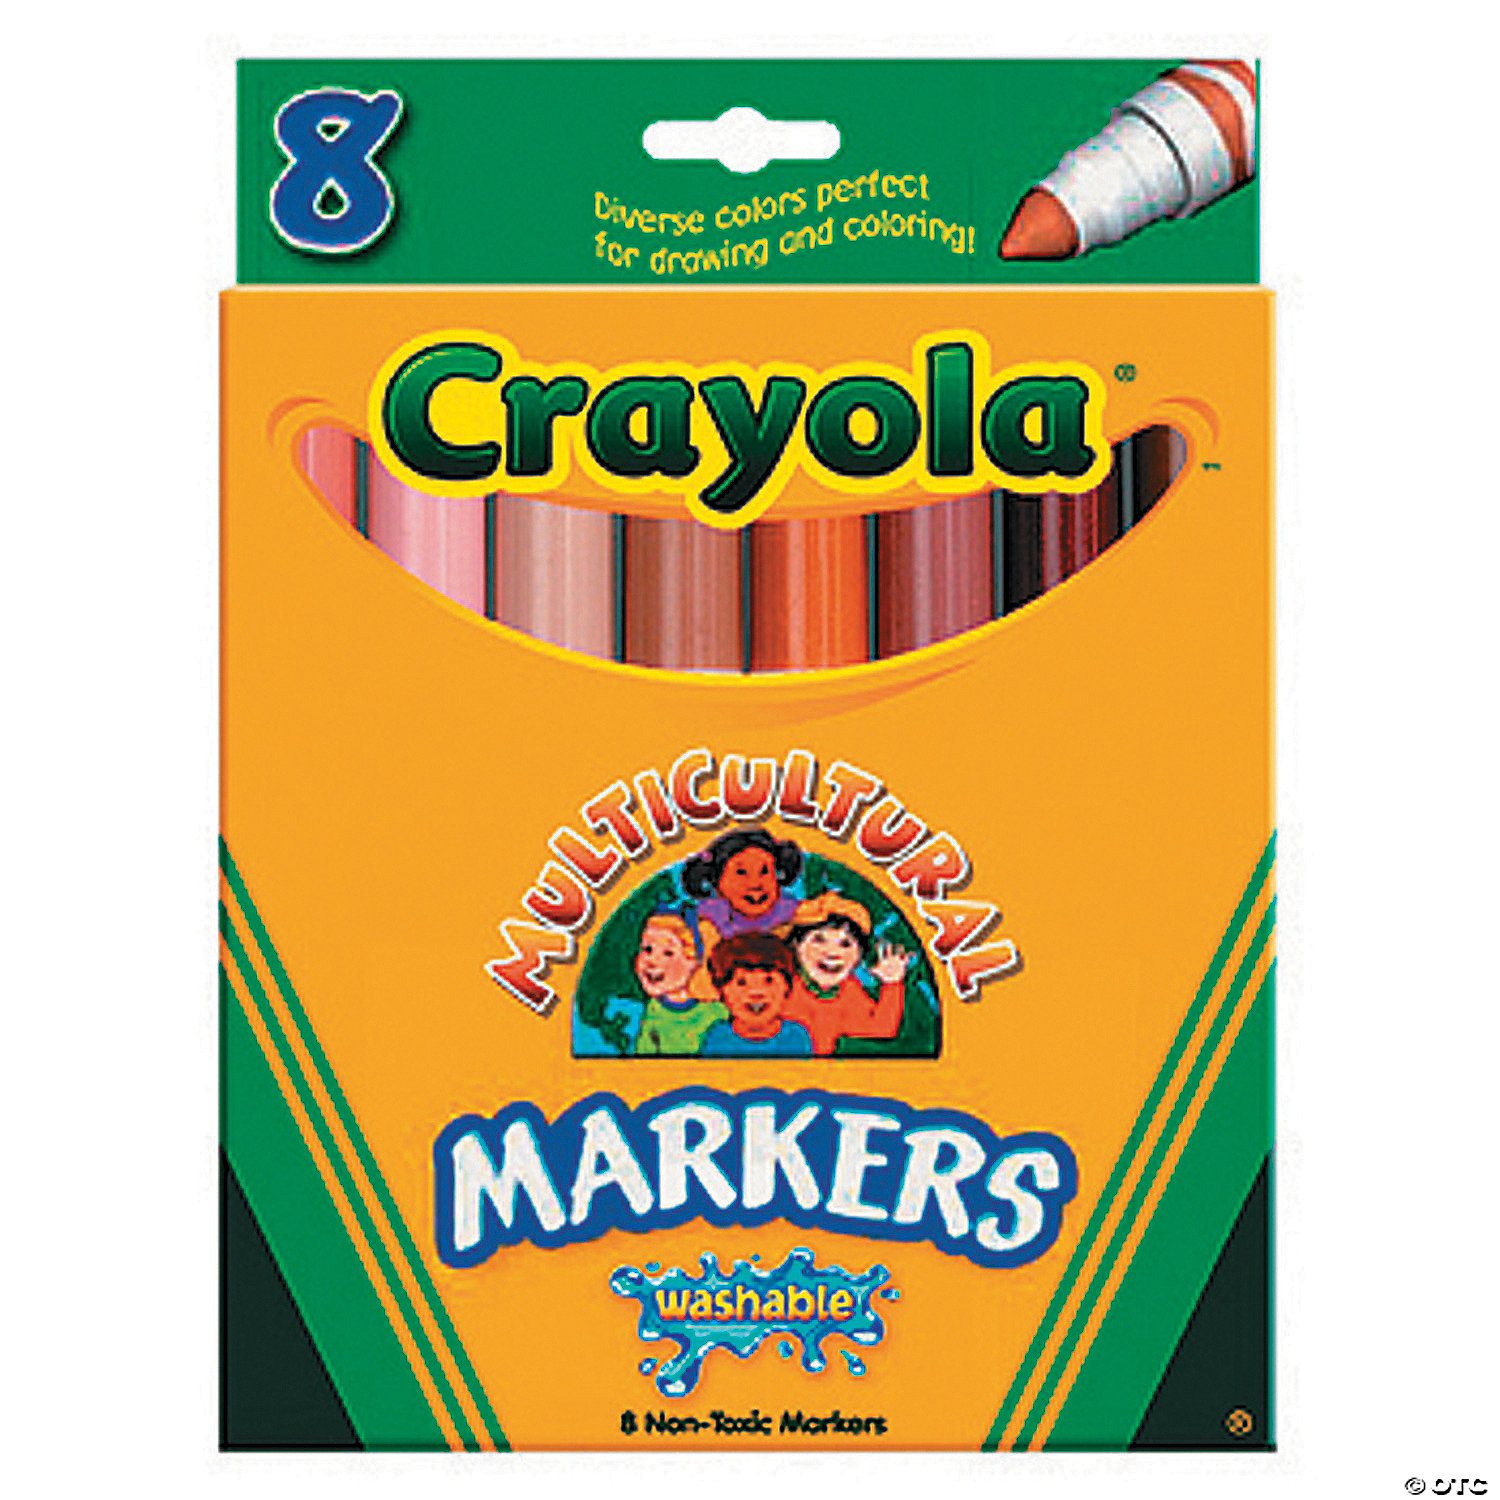 Crayola Multicultural Crayons, Large - 8 pack